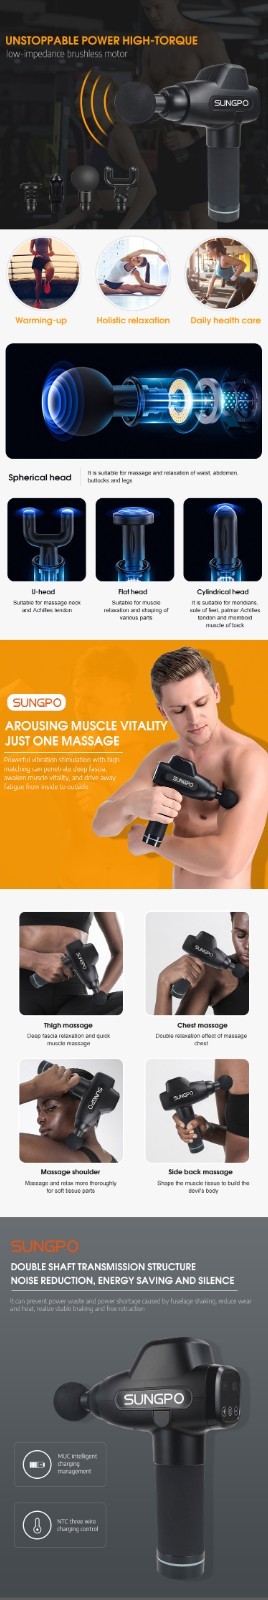 SUNGPO durable power massager factory direct supply for sports injuries